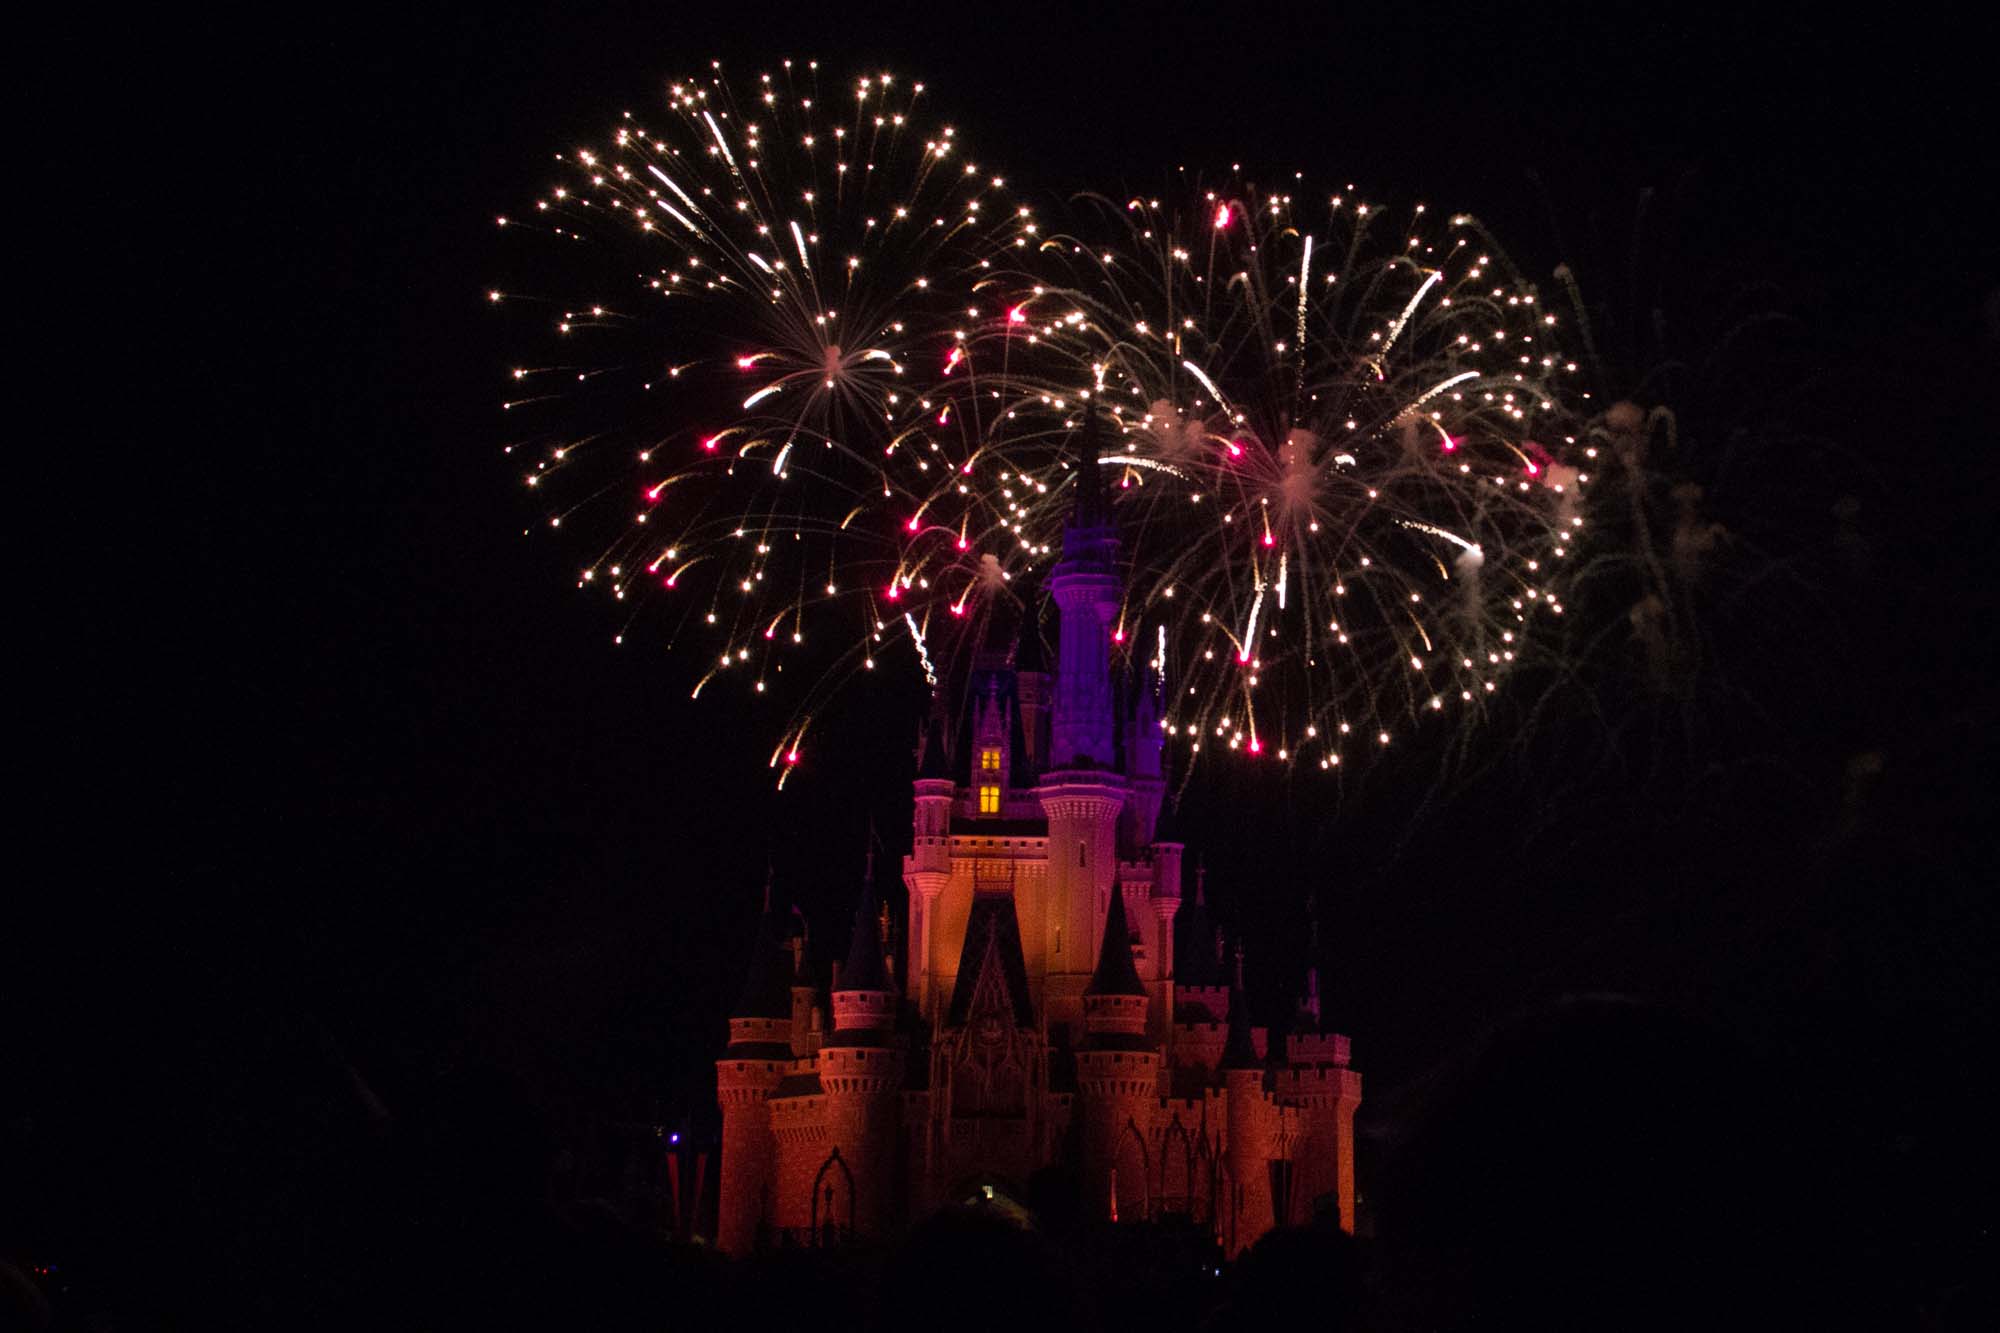 Wishes - Double Fireworks over Orange and Purple Castle